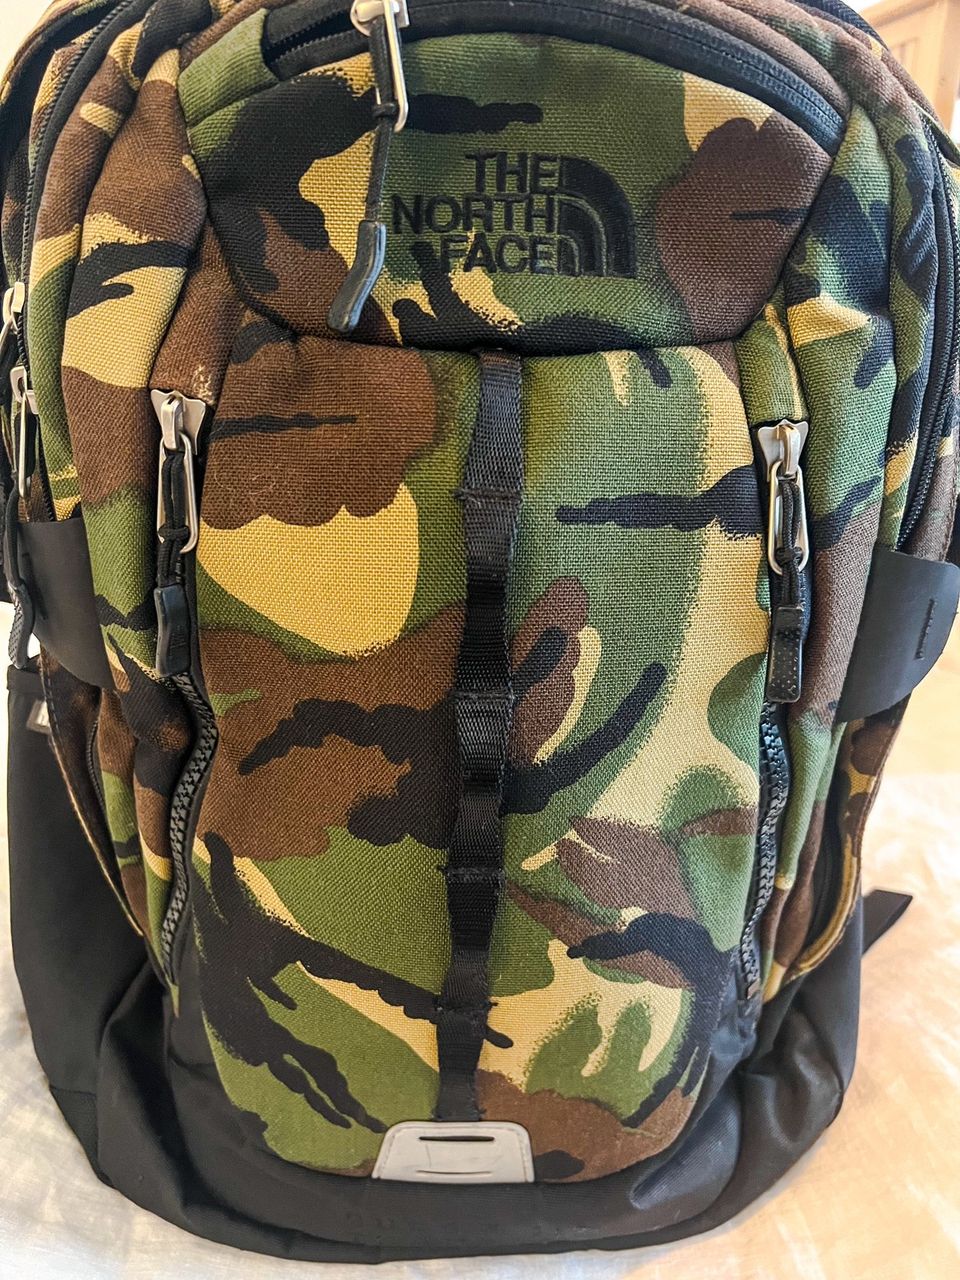 The North Face Surge II Transit Backpack 32 L